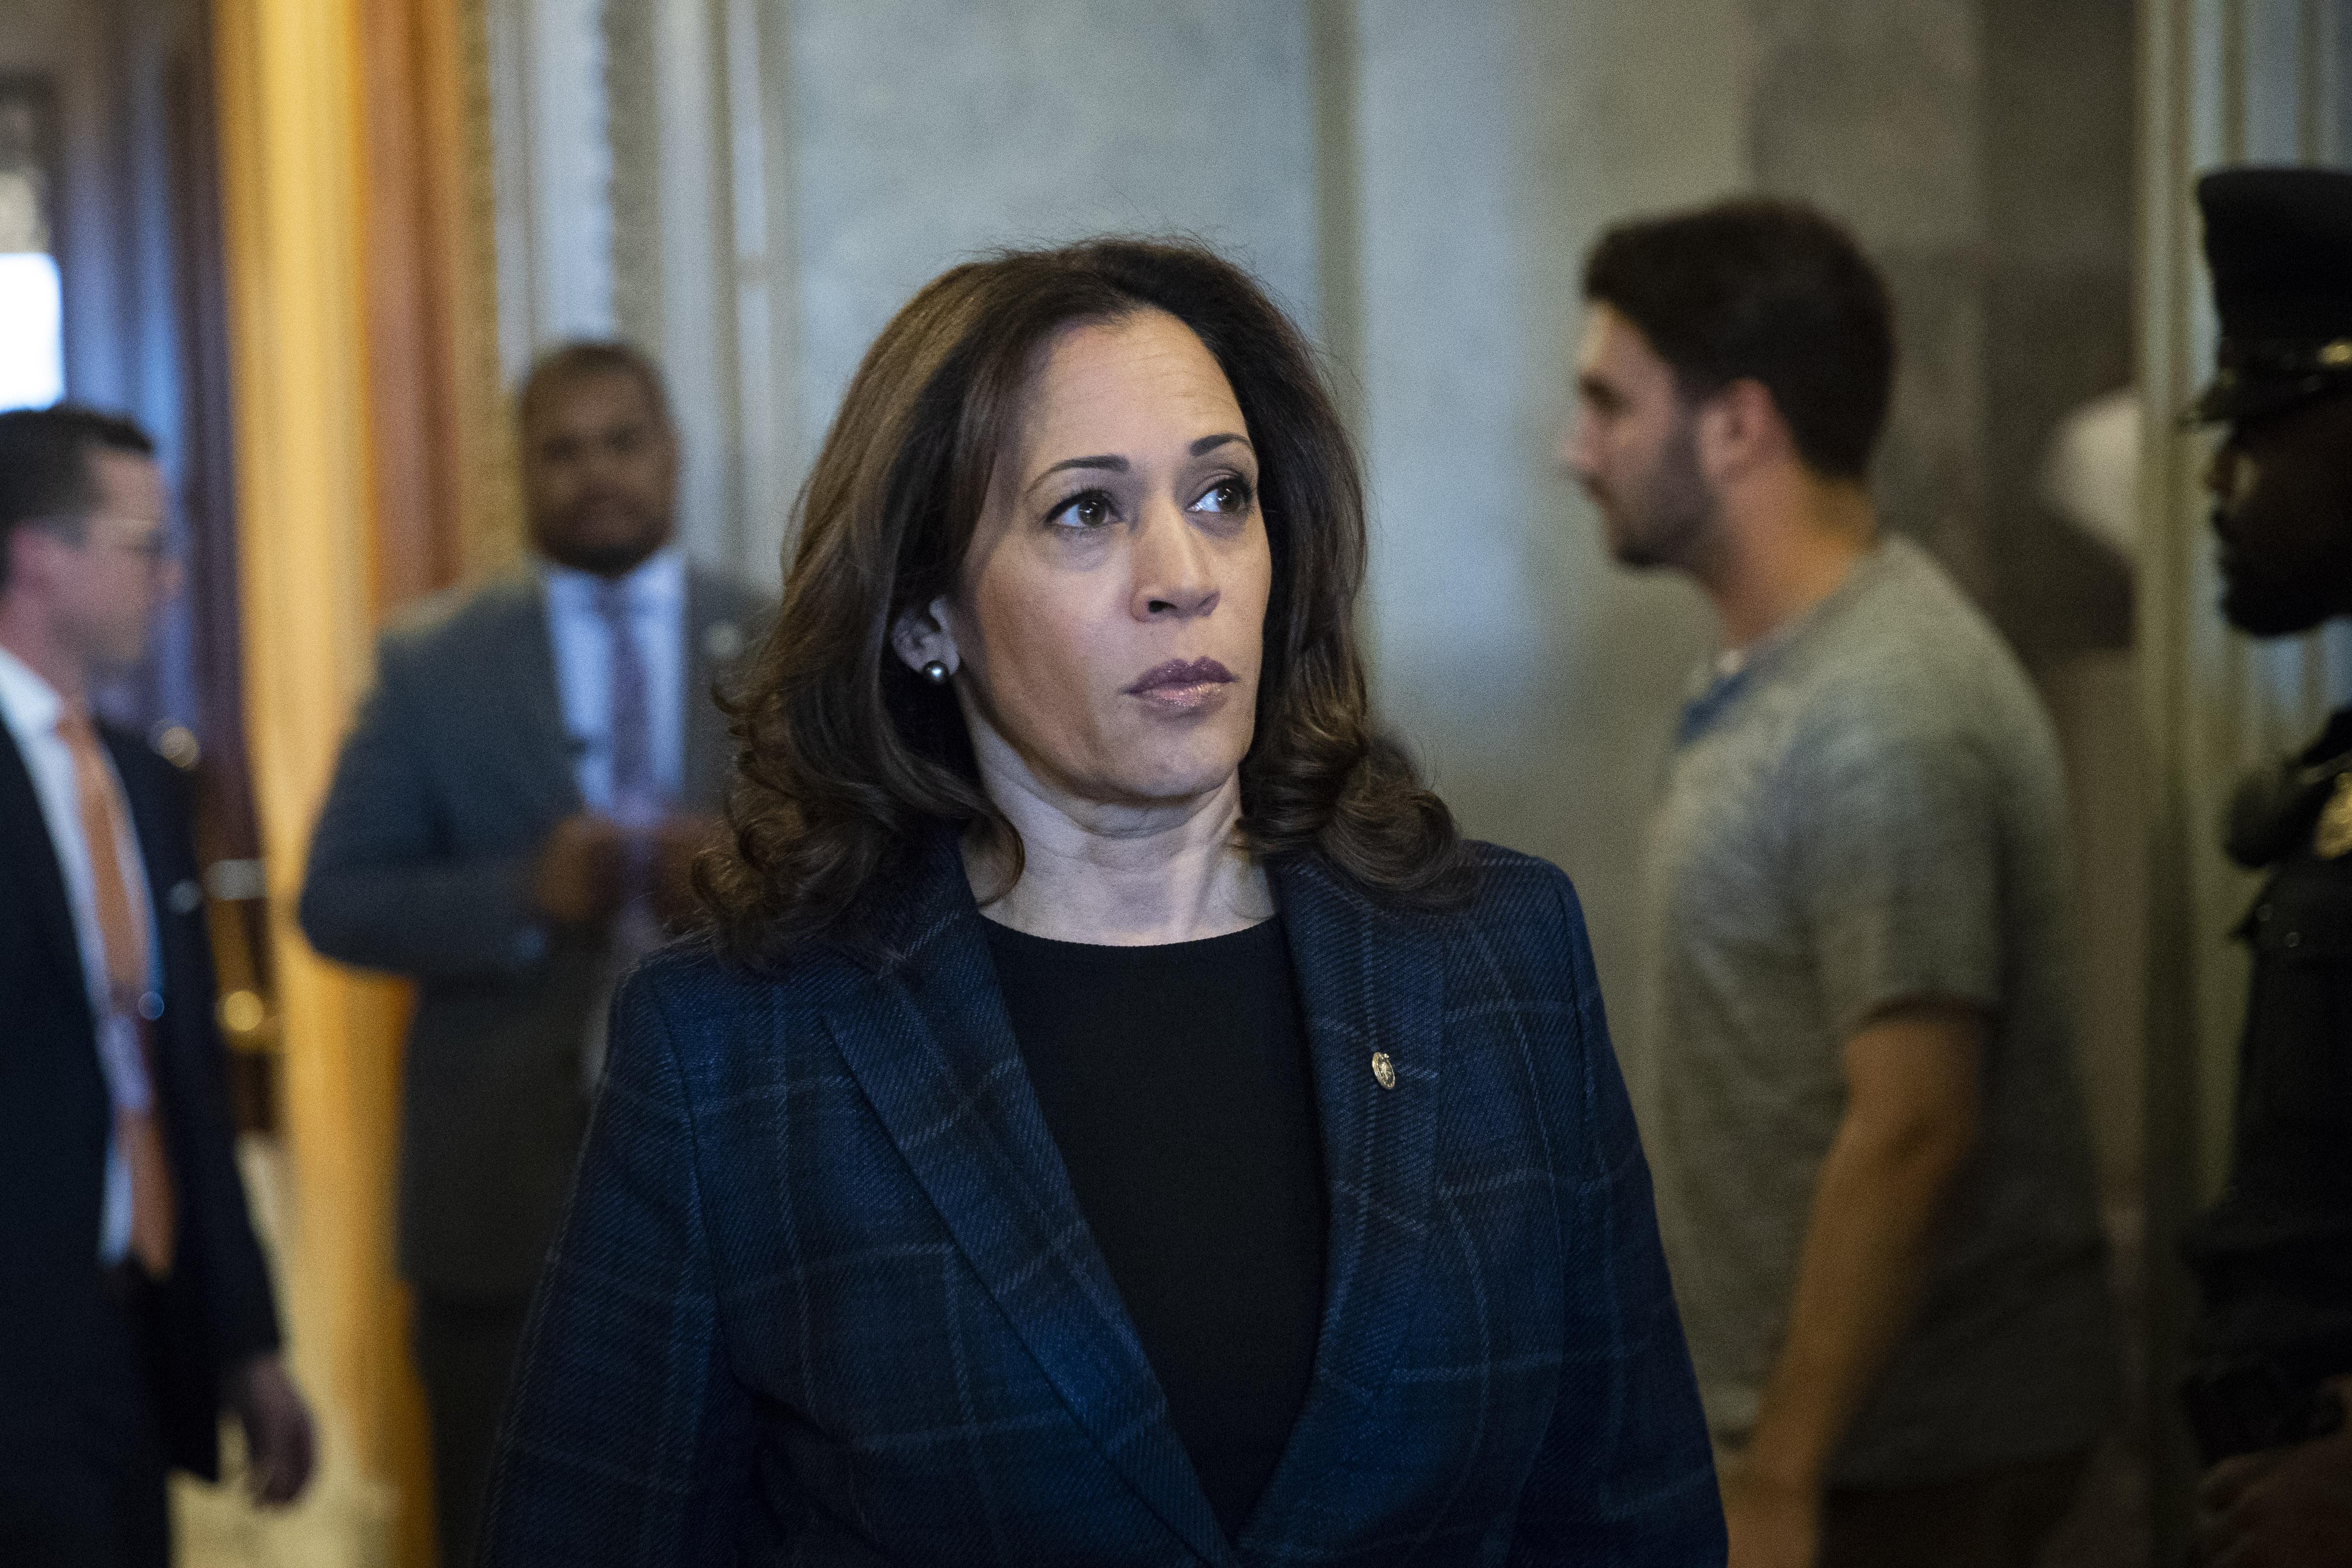 WASHINGTON, DC - OCTOBER 6: Sen. Kamala Harris (D-CA) exits the Senate floor following the Senate's confirmation of the nomination of Judge Brett Kavanaugh to the U.S. Supreme Court, October 6, 2018 in Washington, DC. Kavanaugh was confirmed in a 50-48 vote on Saturday. (Photo by Drew Angerer/Getty Images)